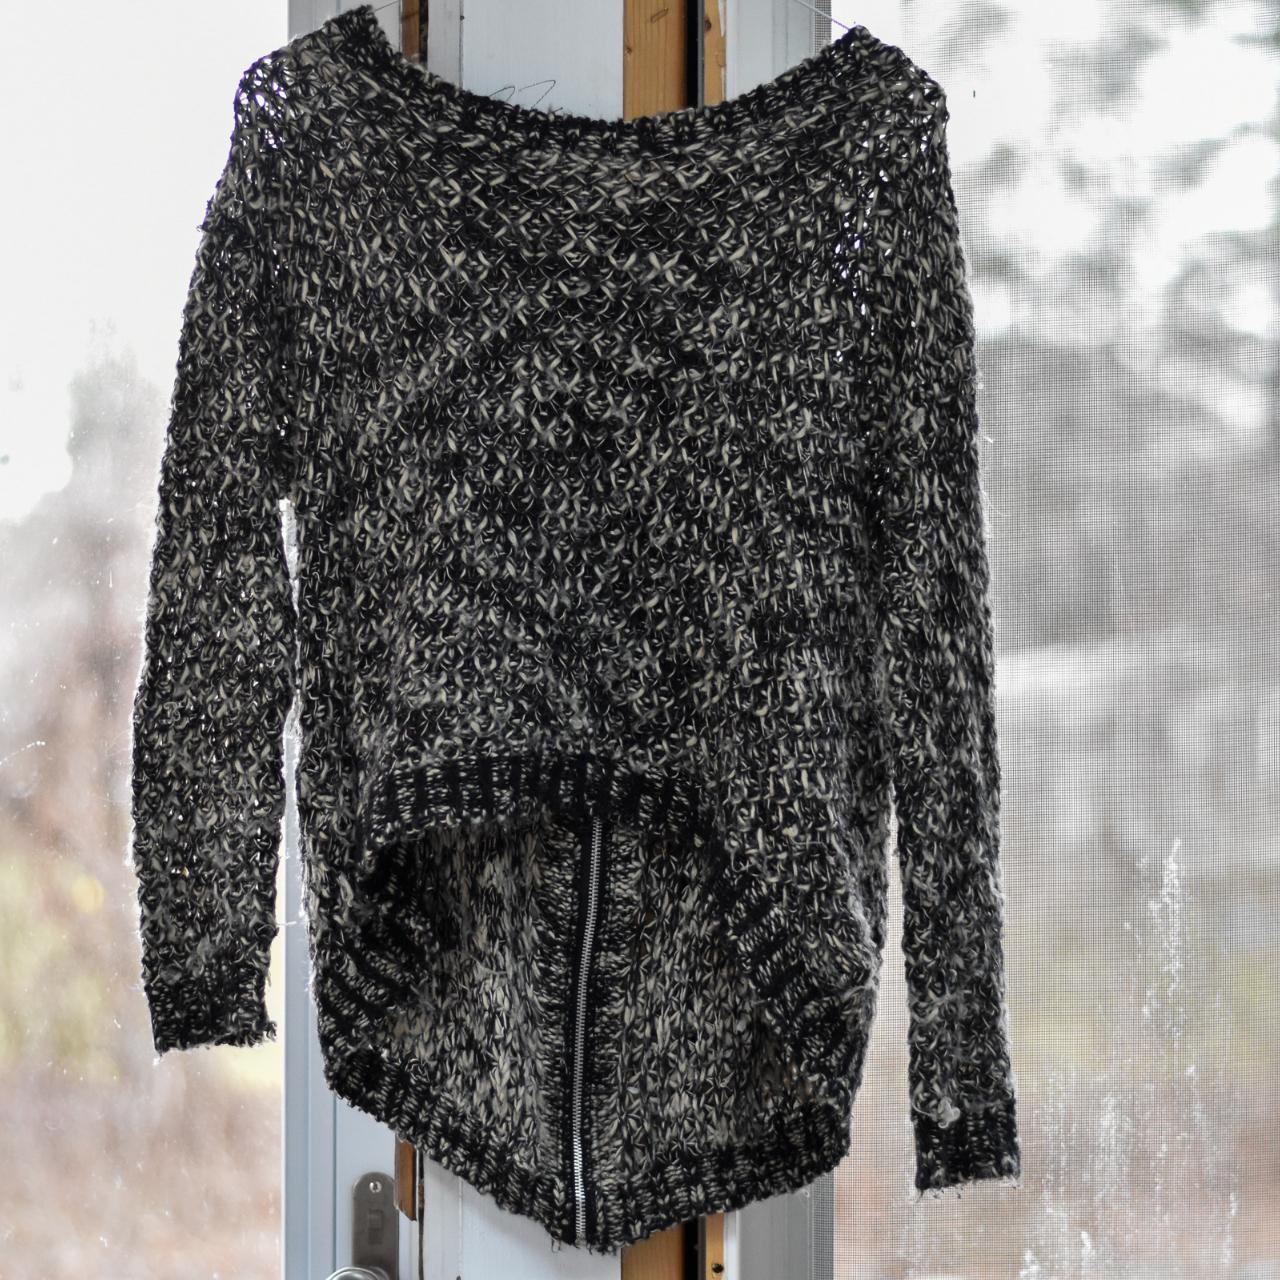 Product Image 1 - ✨ Gorgeous marbled black-and-white knit